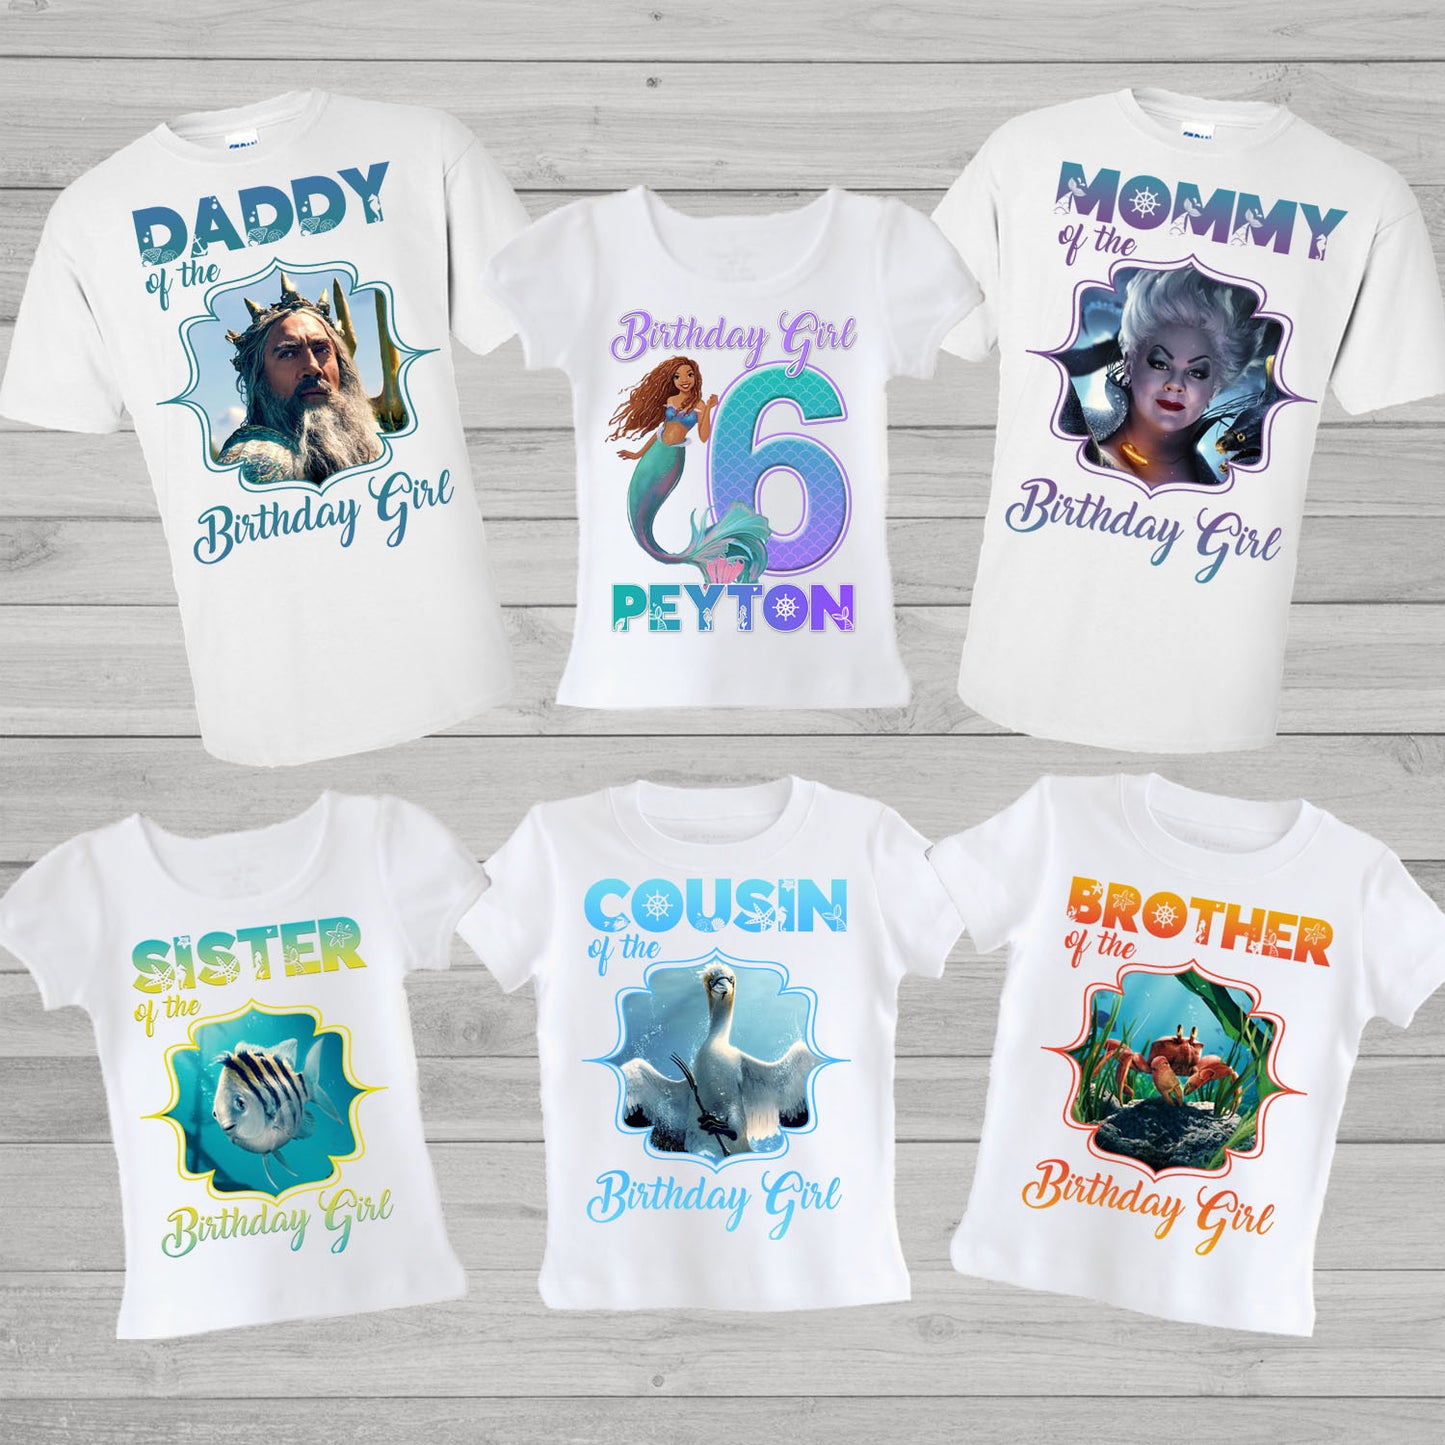 Little Mermaid Live Action family birthday shirts